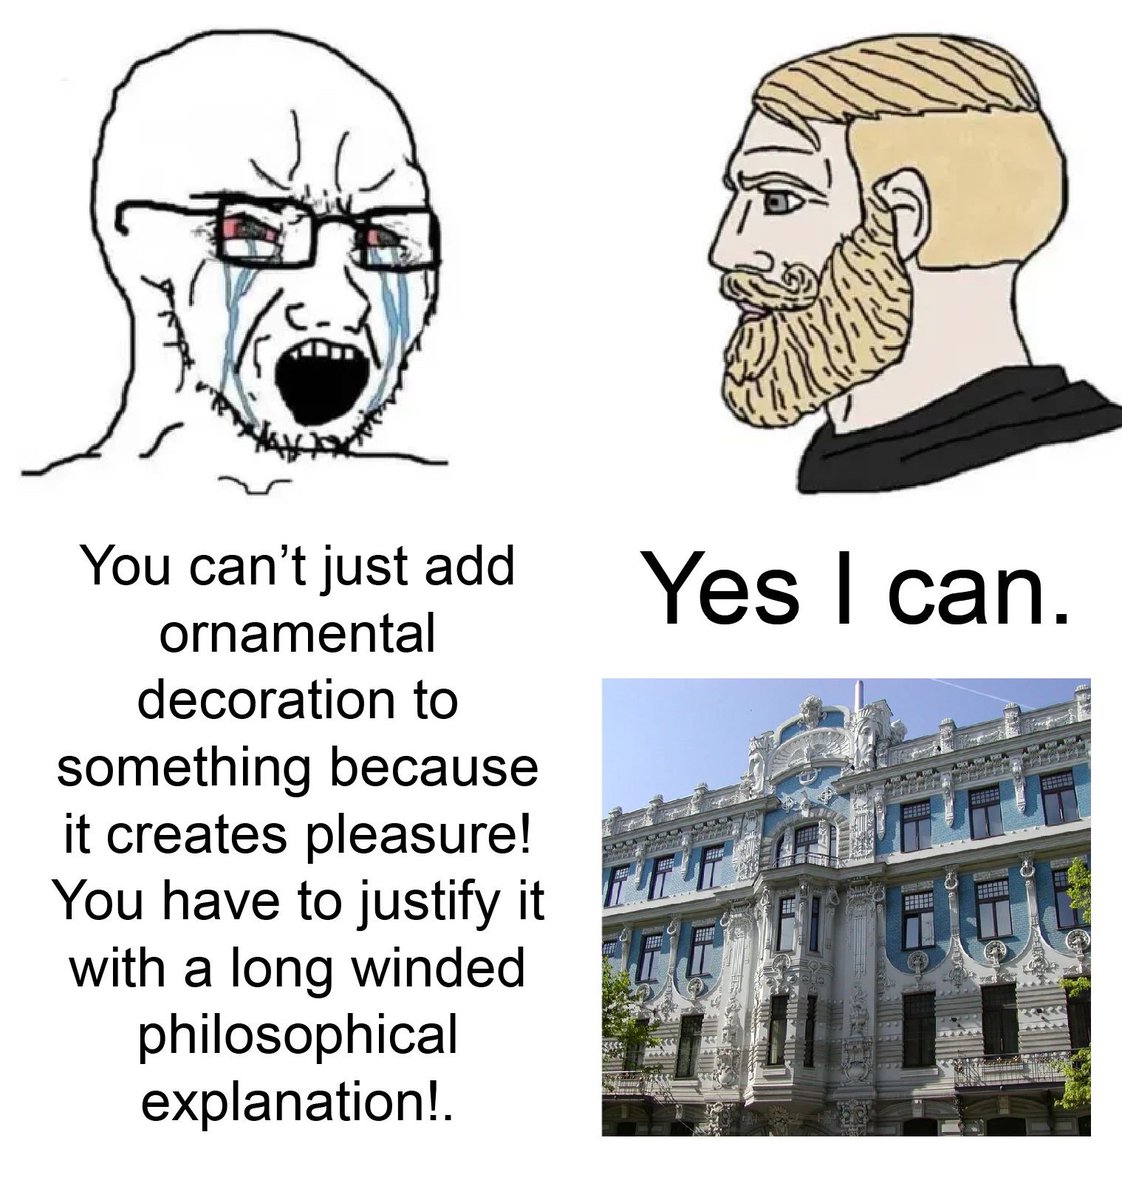 Fuck modernist and post-modernist architecture